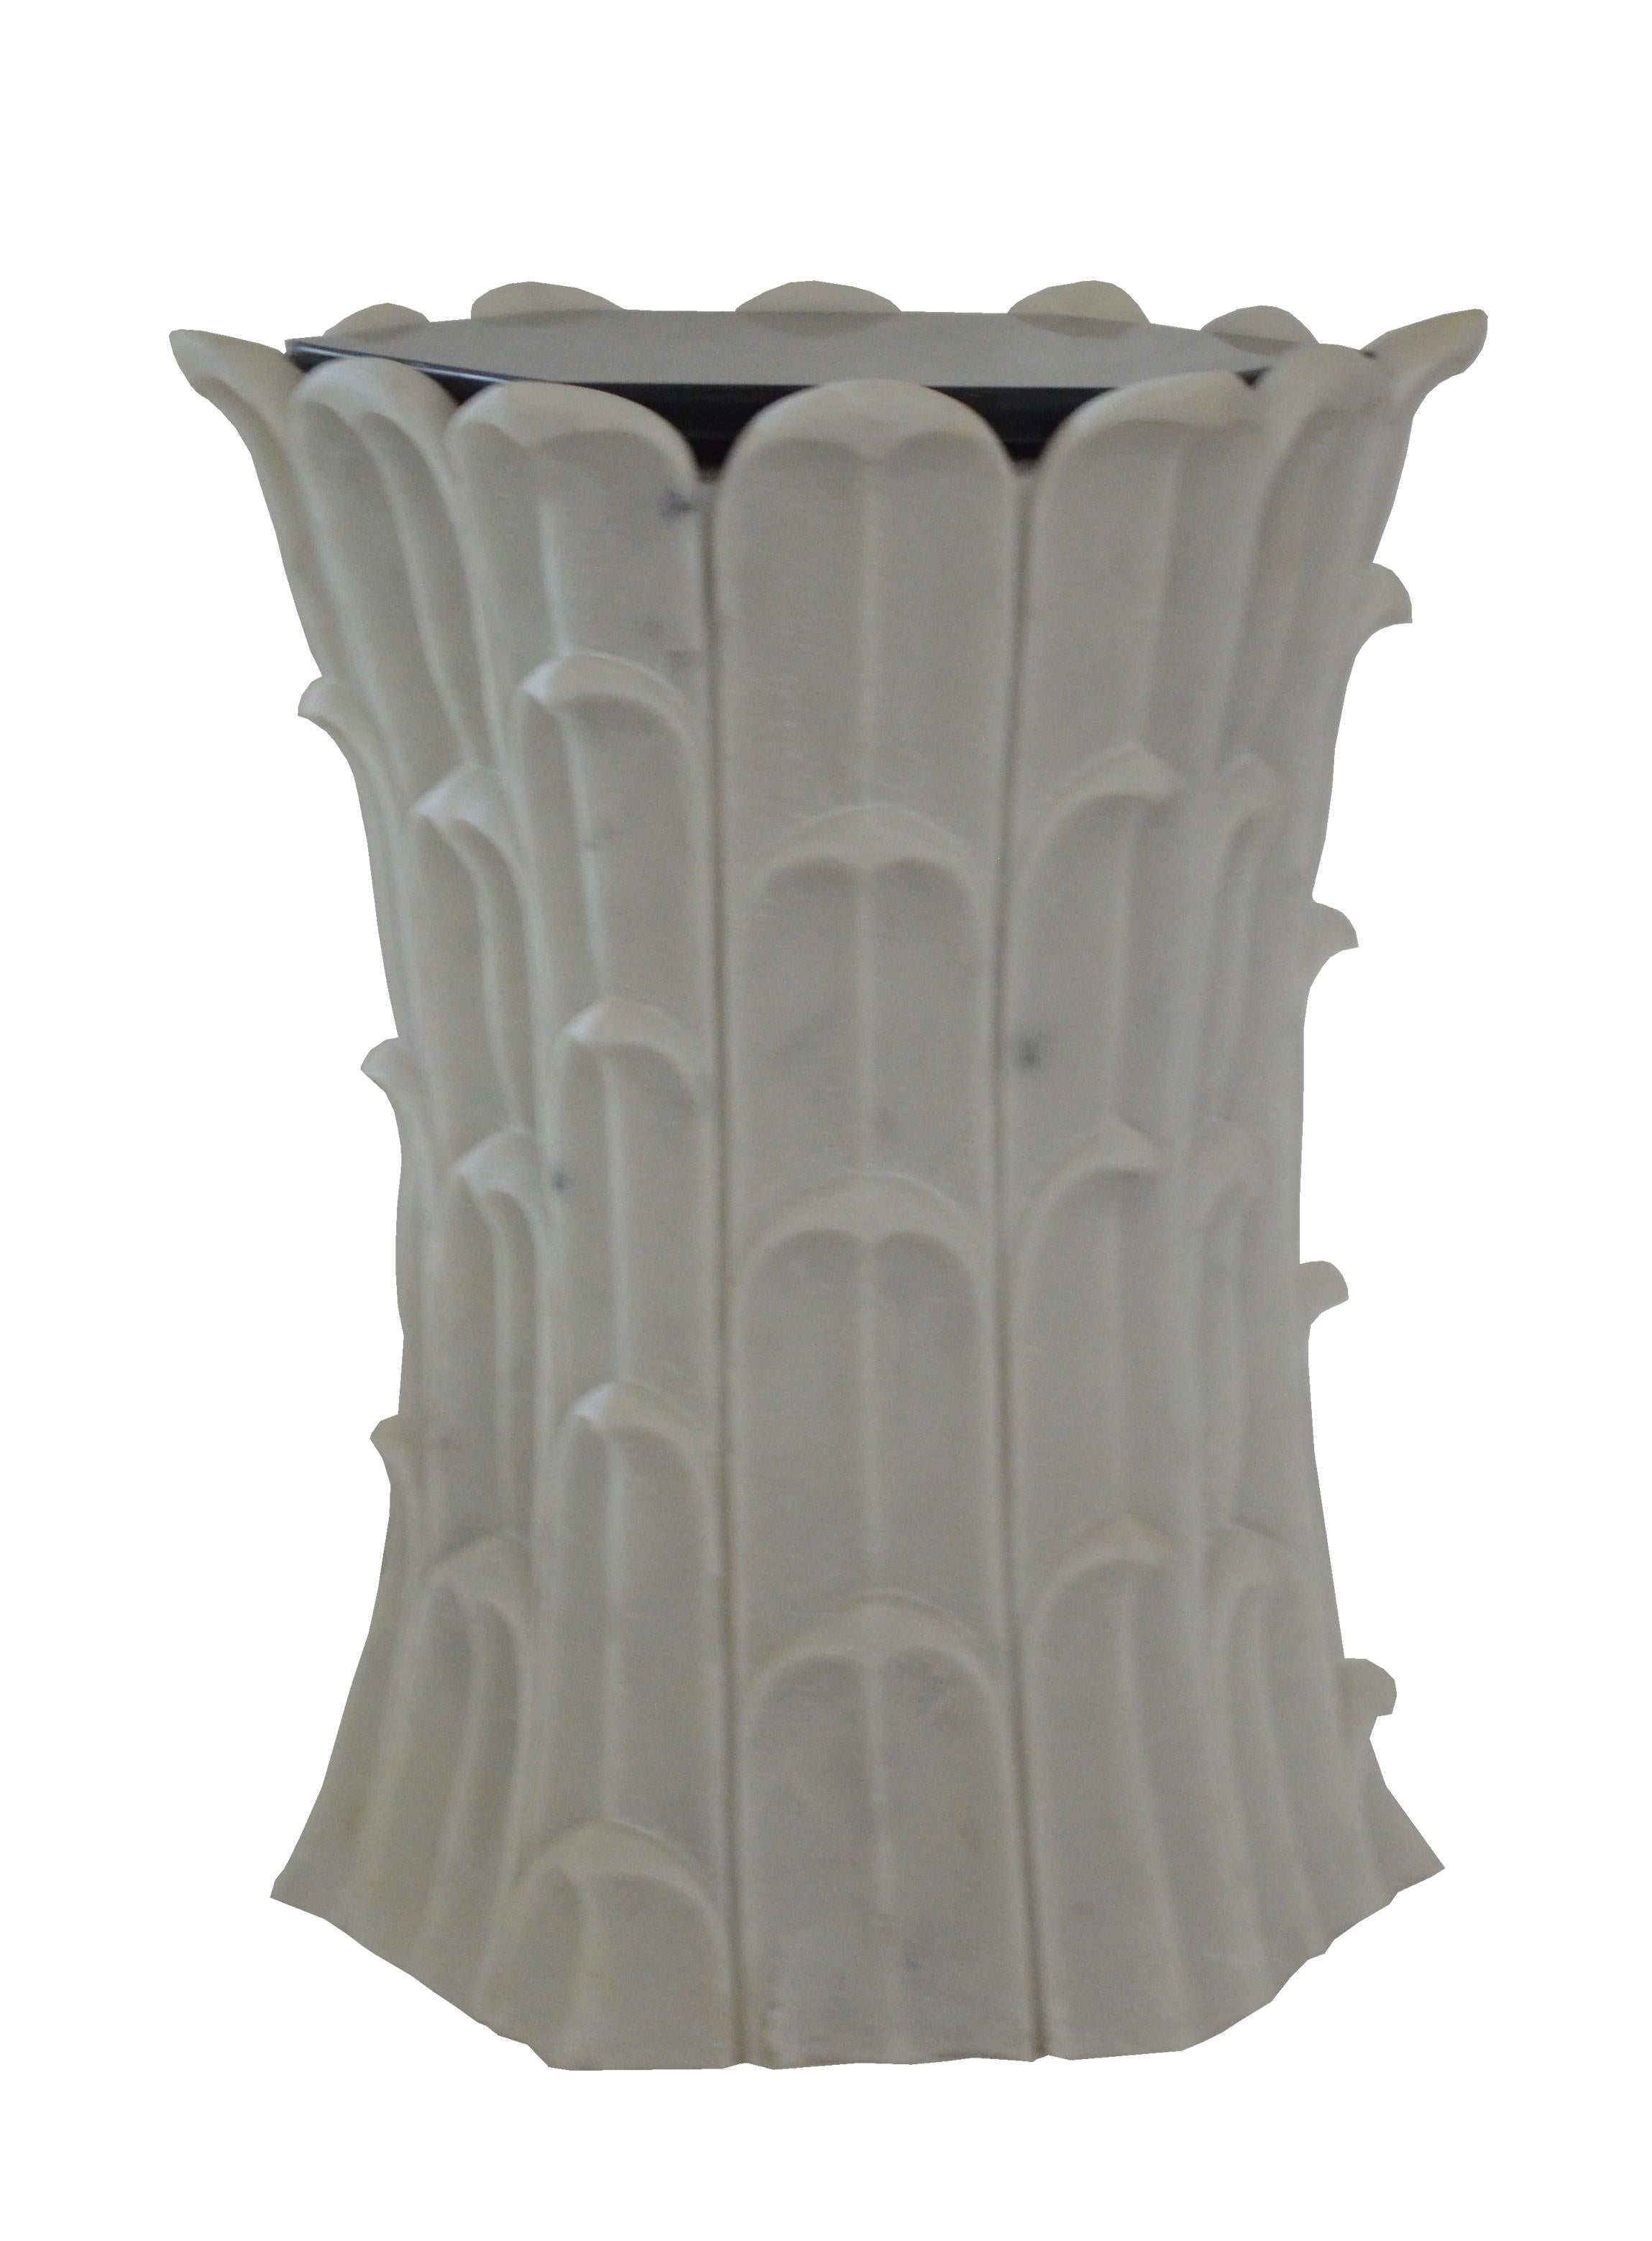 Hand-Carved Set of Two Bamboo Grove Side Tables in Agra White Marble Handcrafted in India For Sale